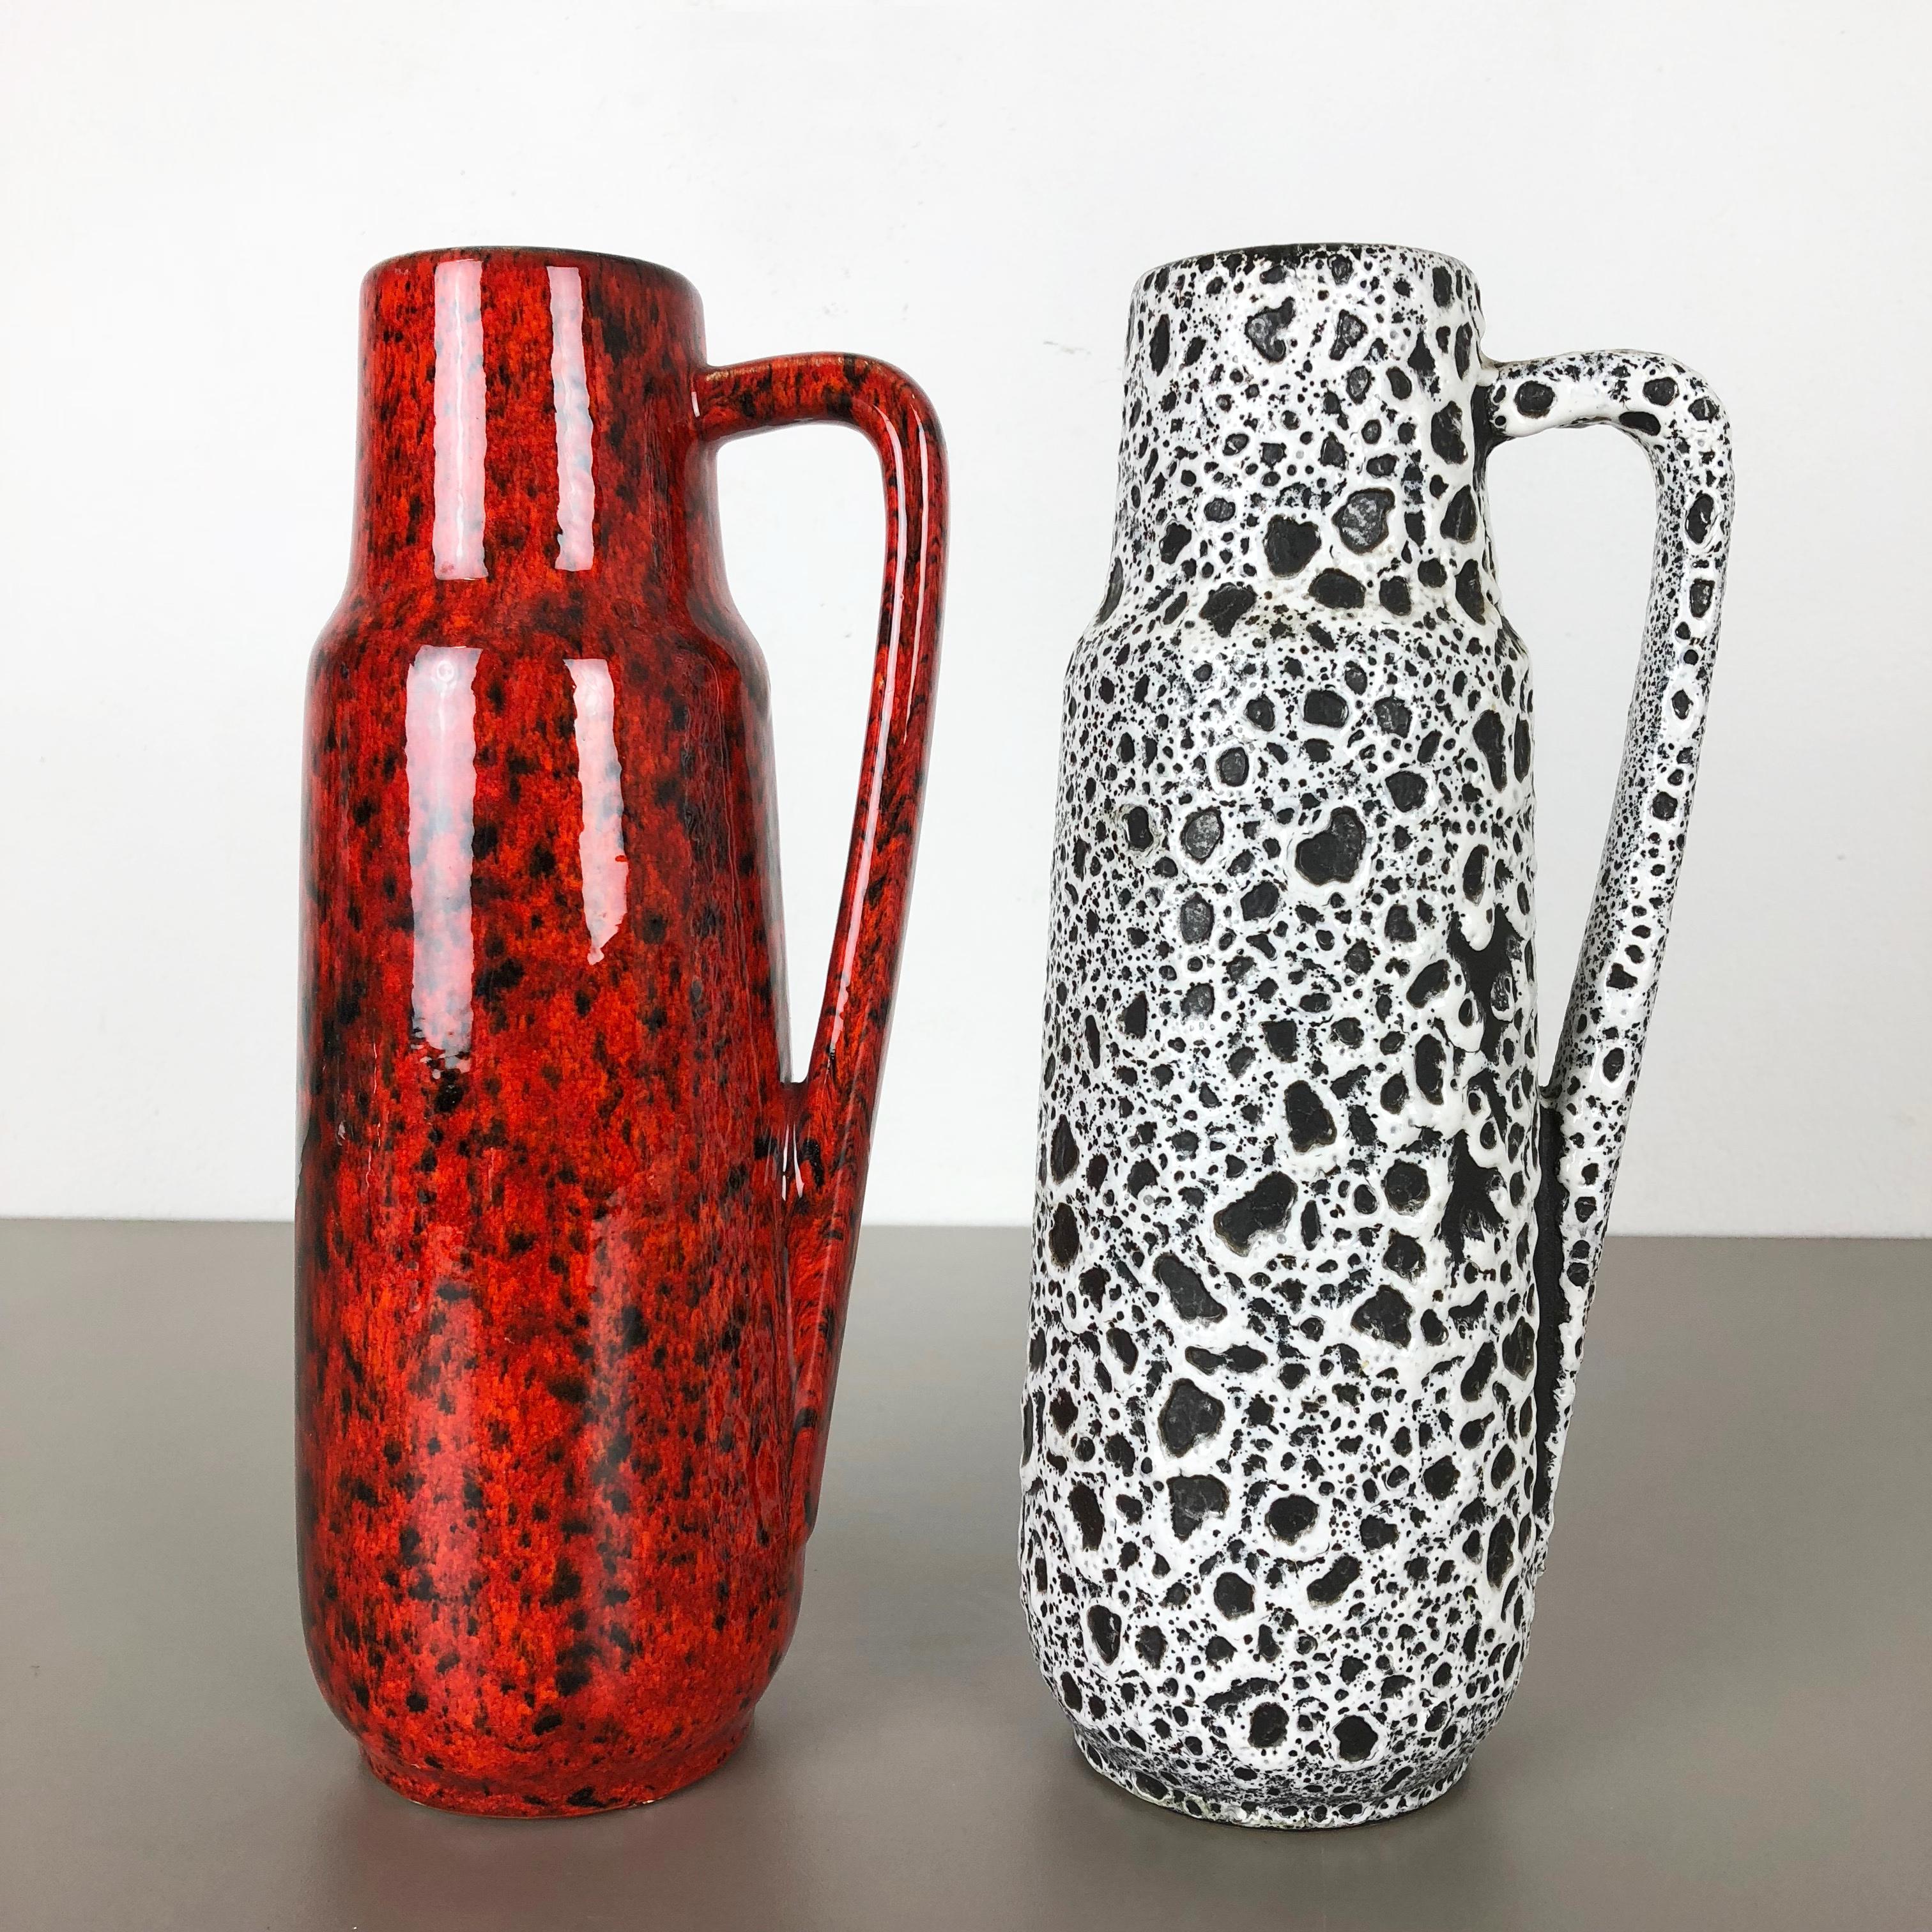 Article:

Set of two Fat Lava art vases


Producer:

Scheurich, Germany


Design:

Nr. 275 28



Decade:

1970s


Description:

This original vintage Vase was produced in the 1970s in Germany. It is made of porcelain in Fat